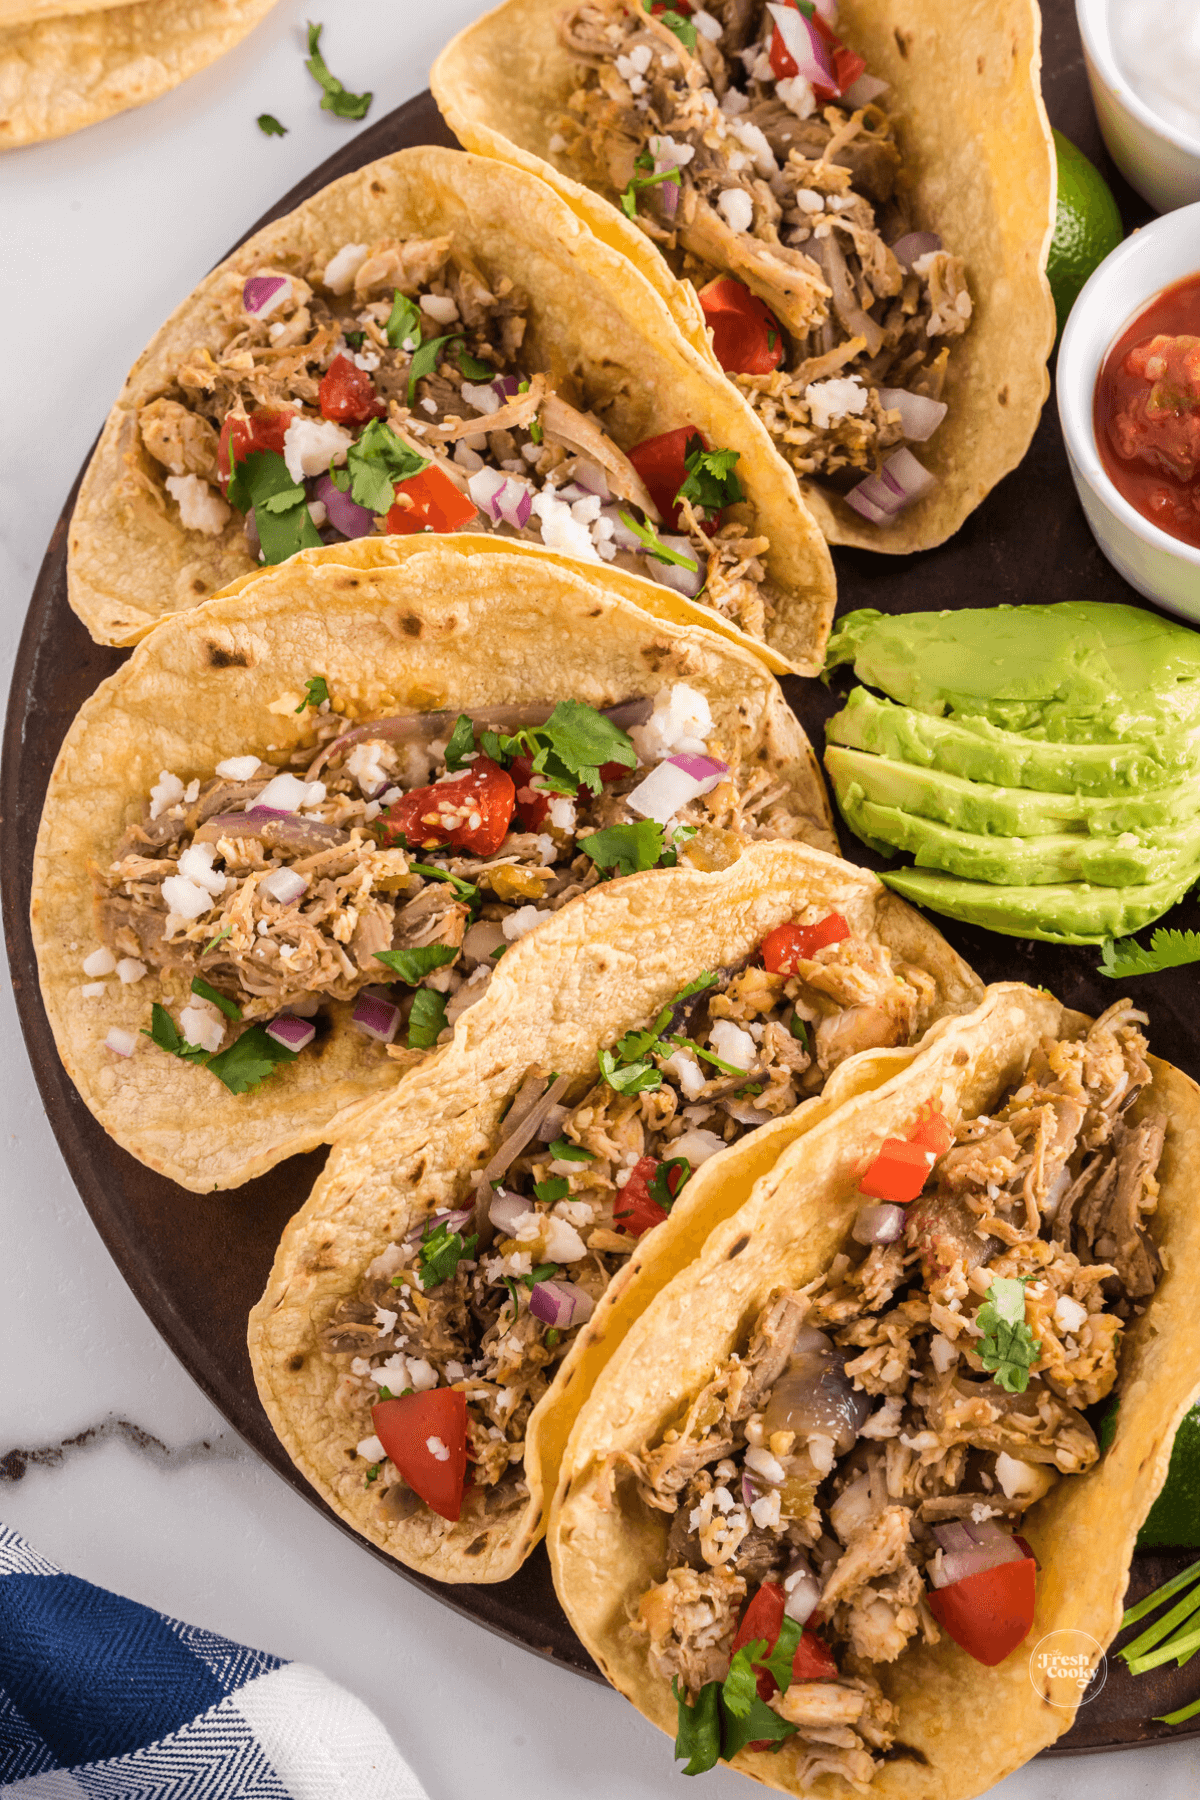 6 turkey tacos on platter with avocado and toppings.